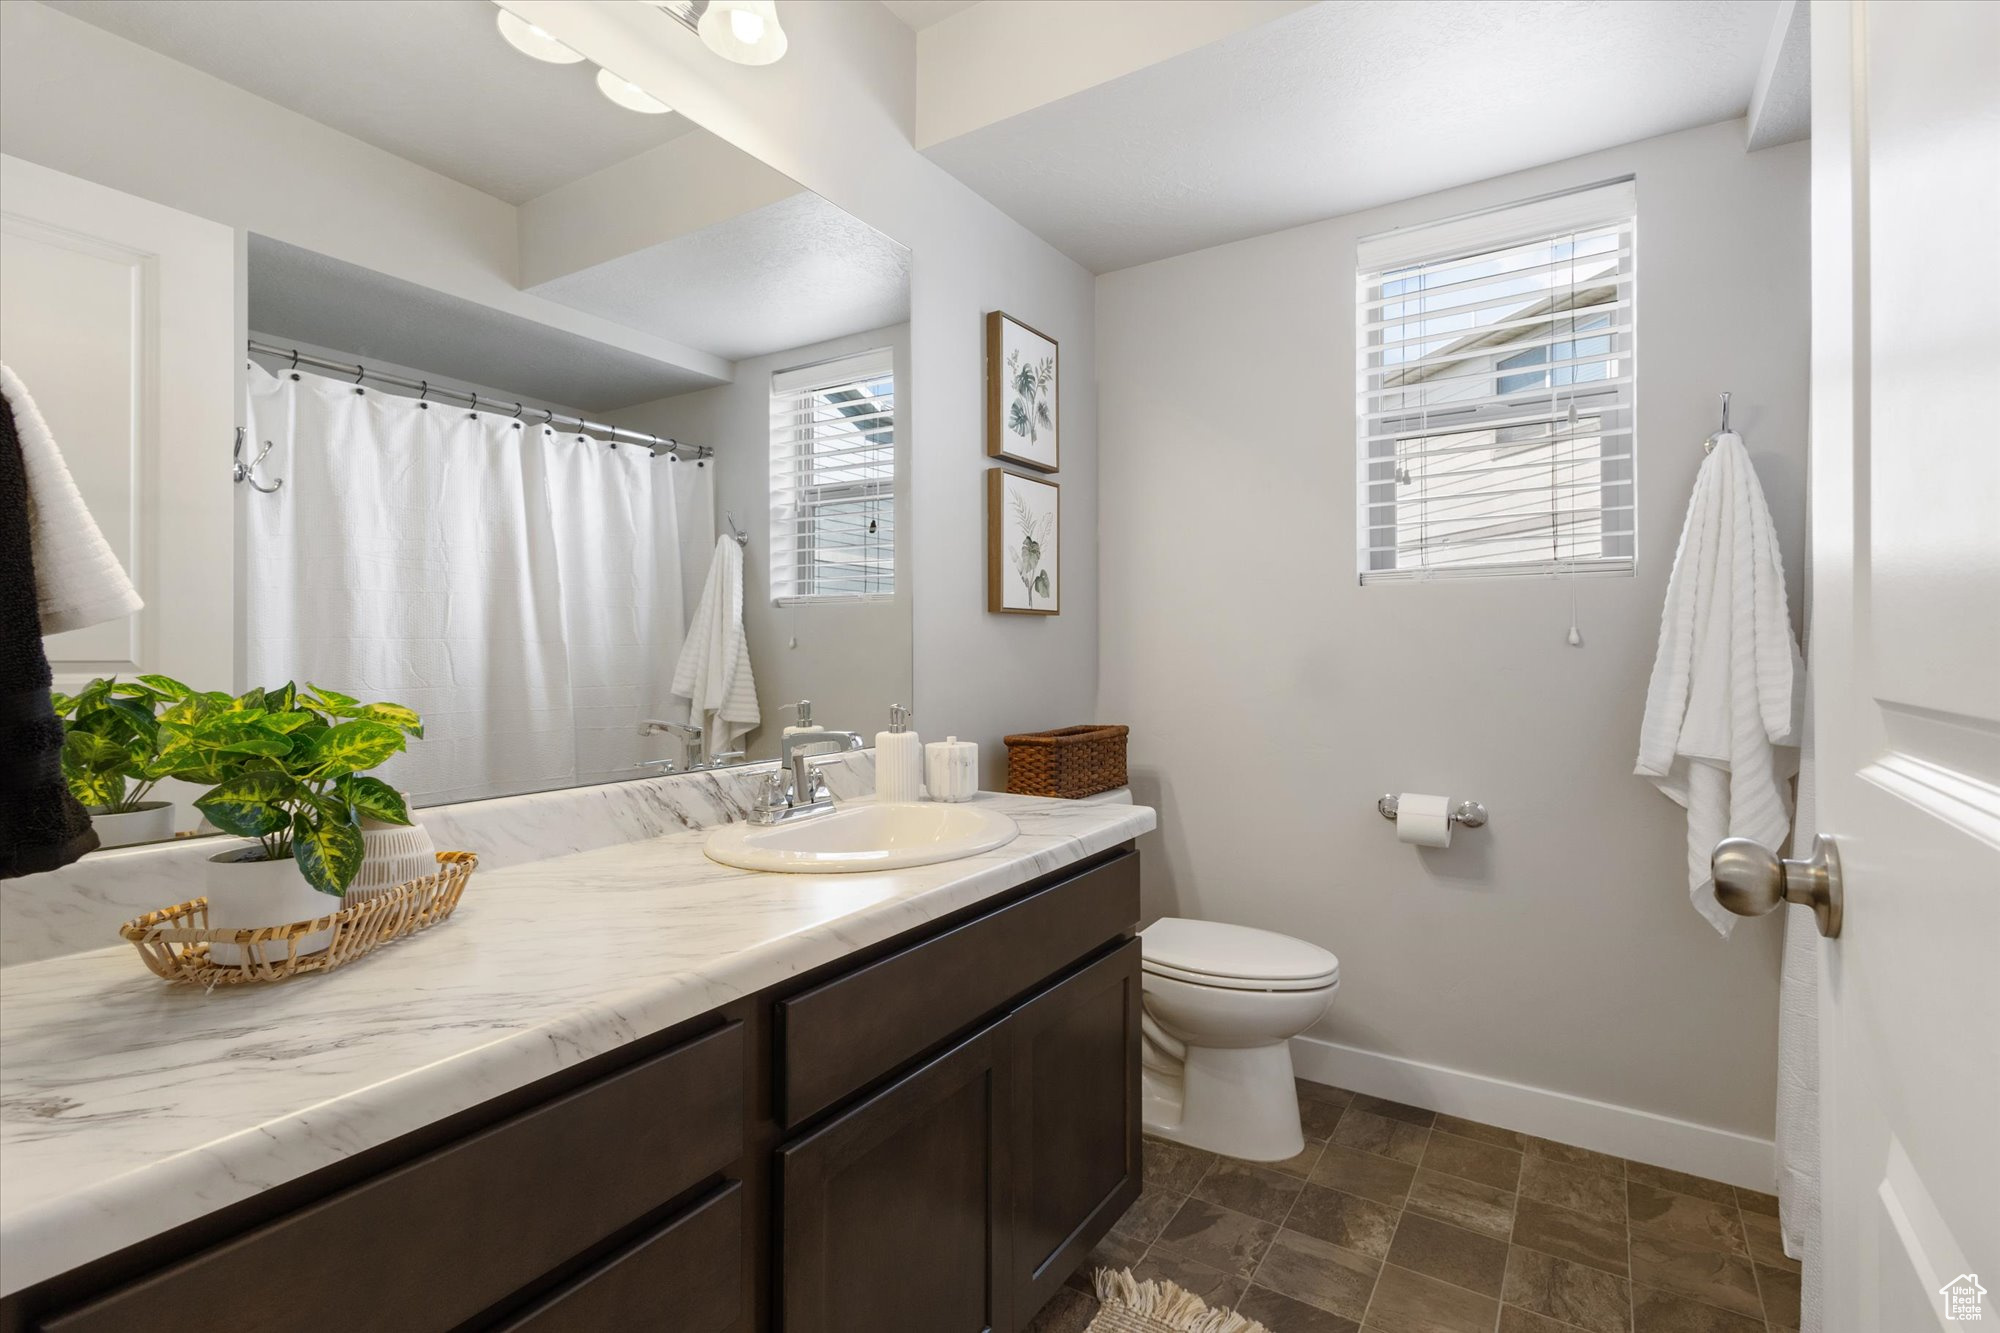 Full Bathroom with a wealth of natural light and large vanity